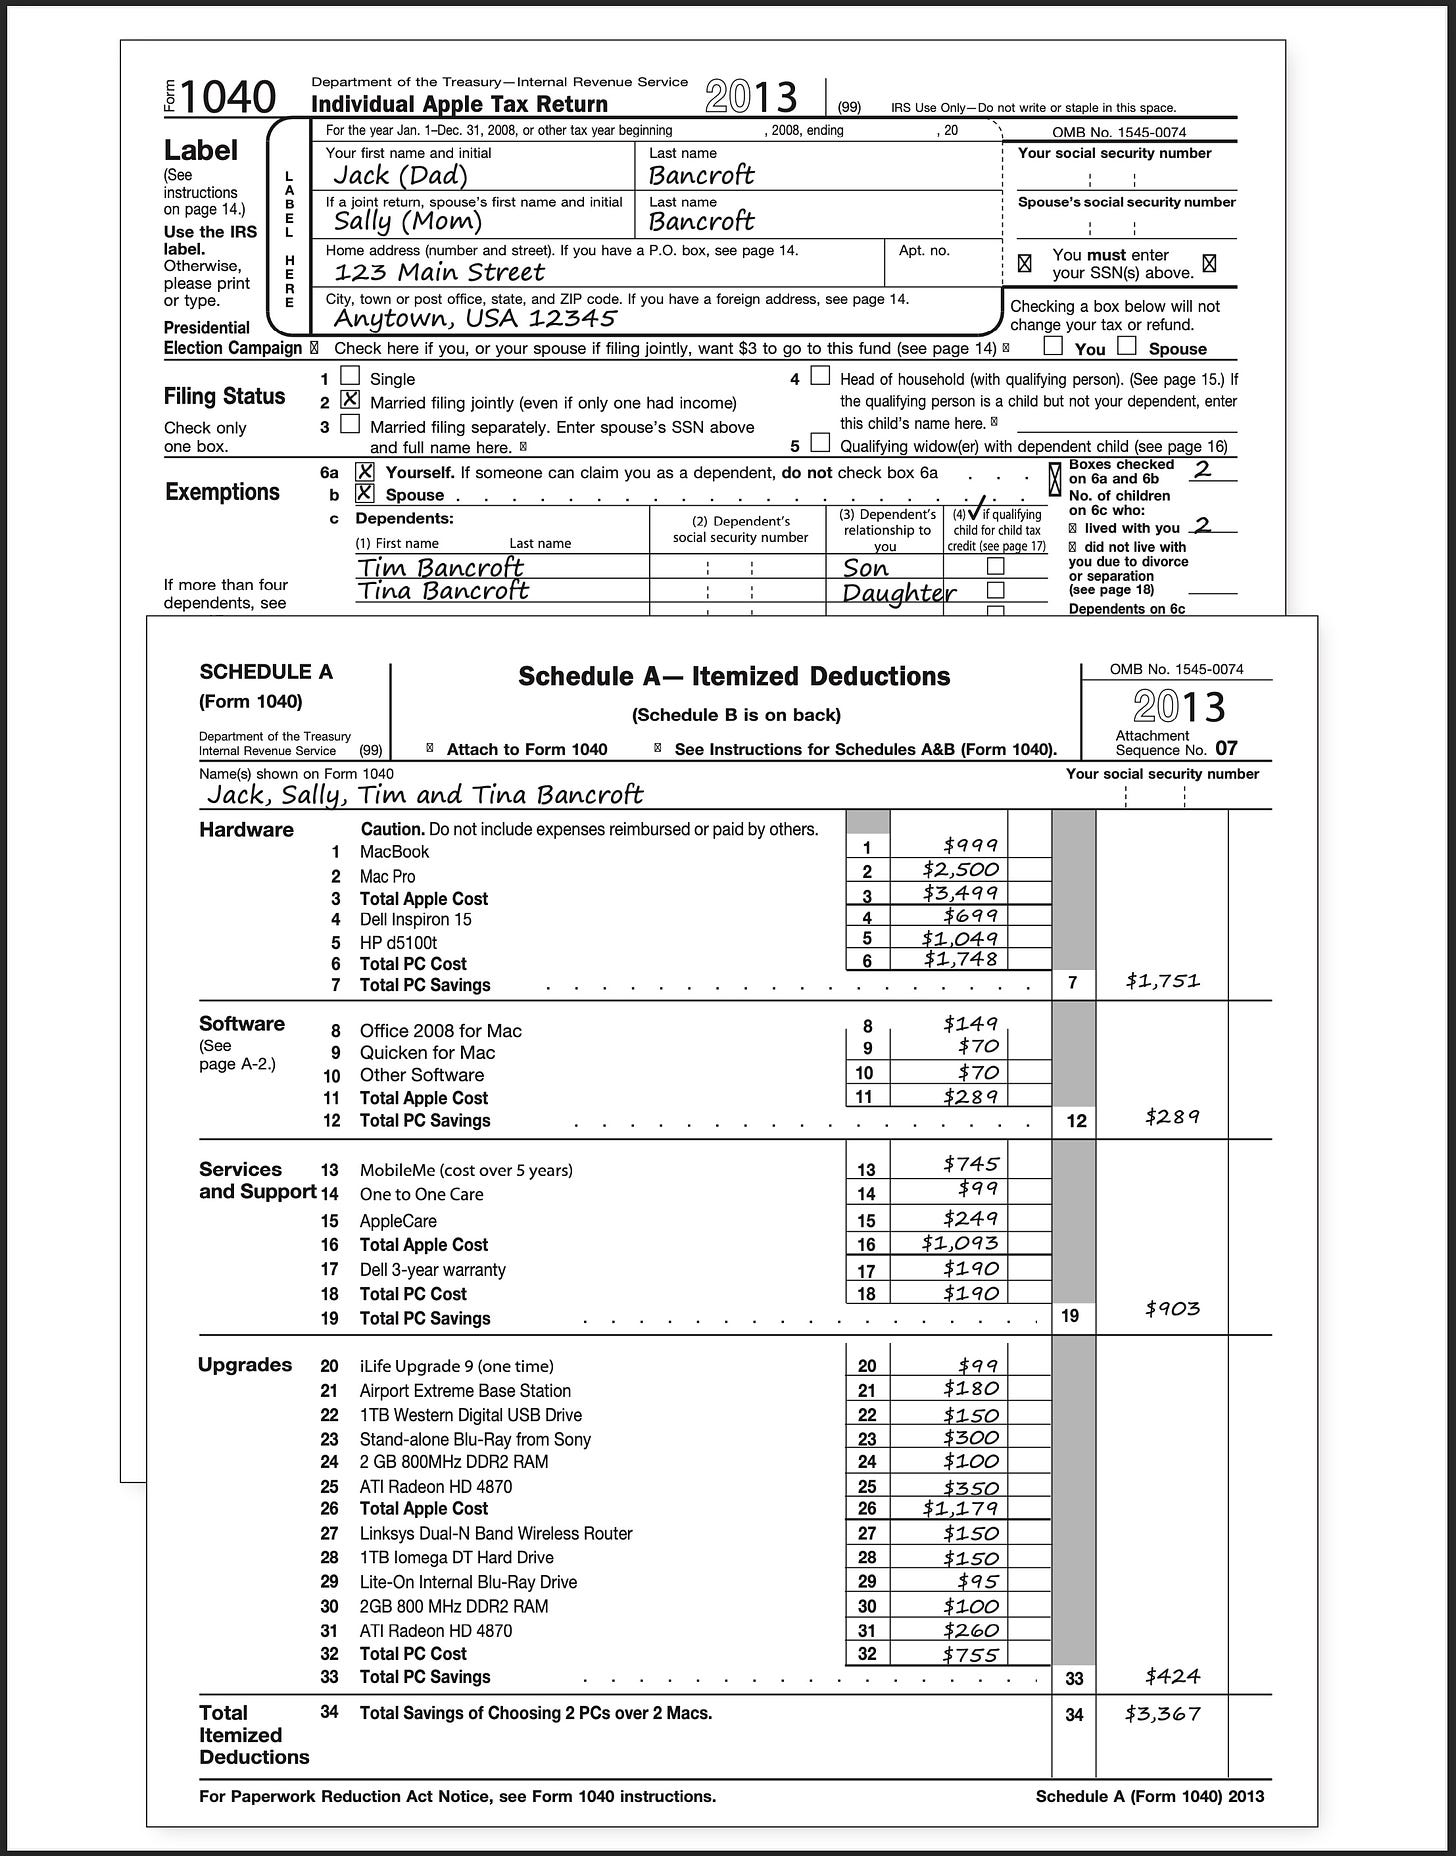 A fictitious "Apple Tax" internal revenue form representing the amount of extra money spent by a family using Macintosh instead of a Windows PC. It is a full IRS form with a net savings of $3,367 dollars for the family if they used Windows.